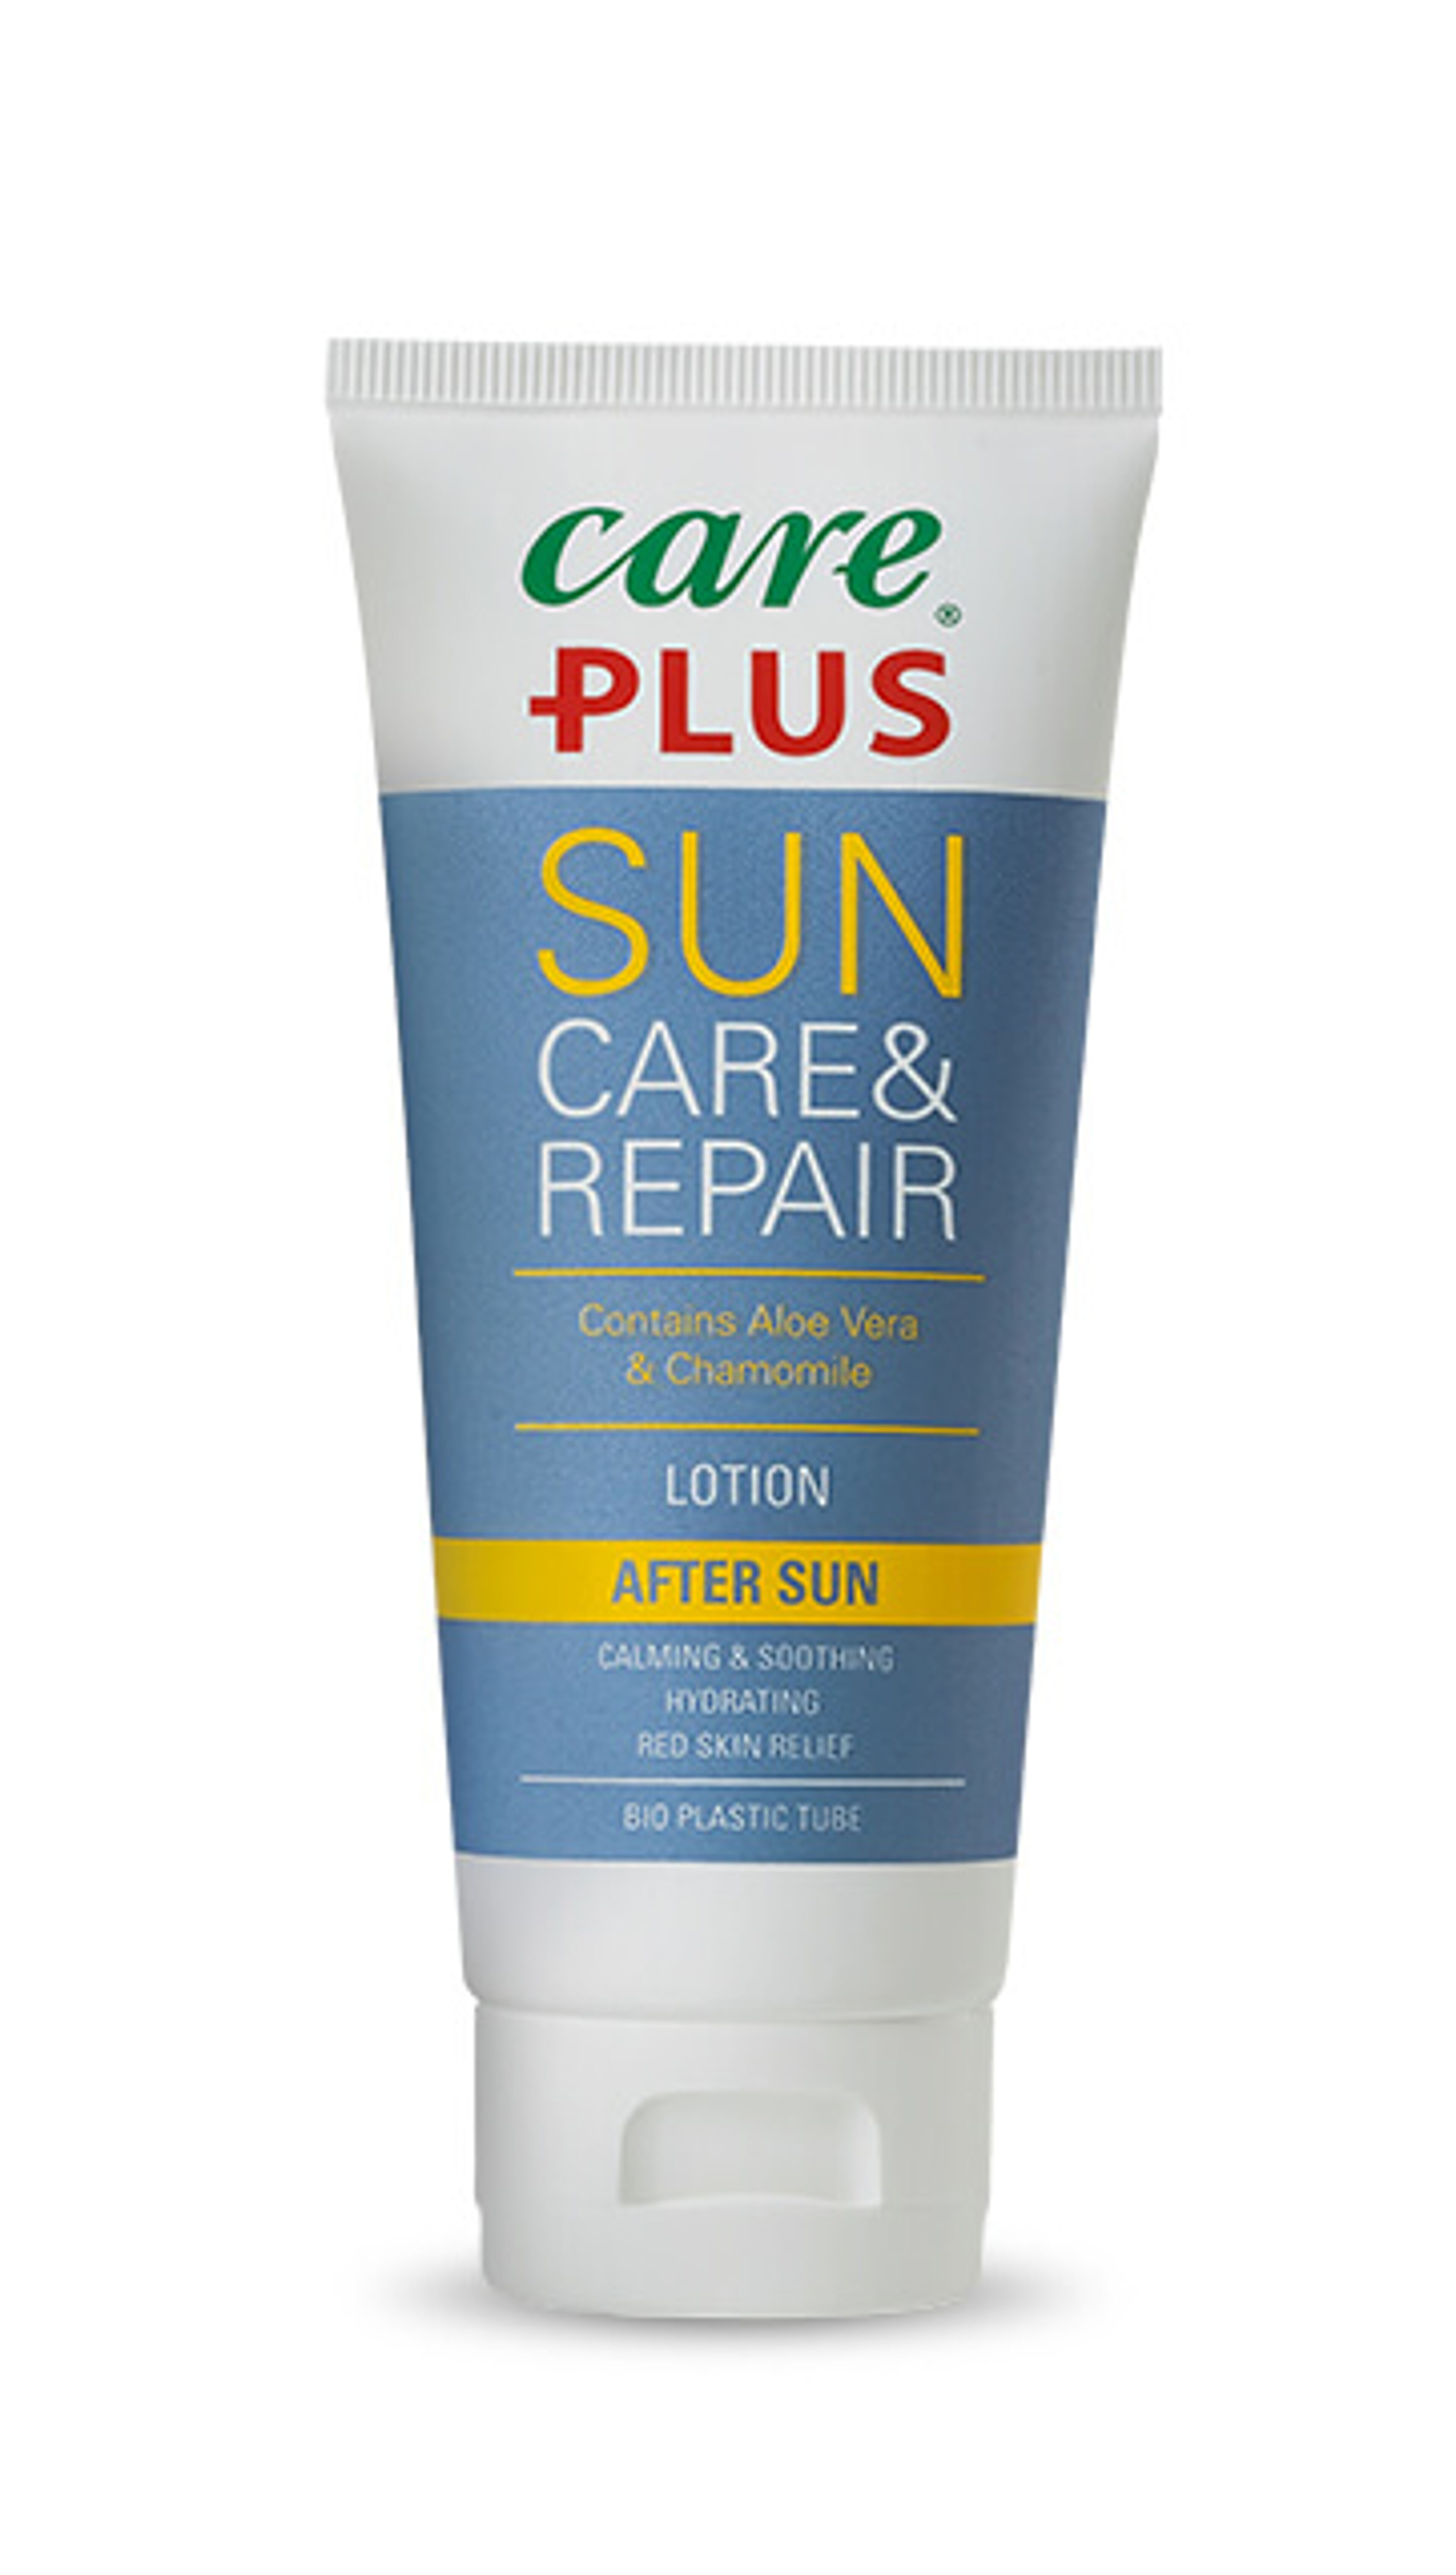 Care Plus SUN PROTECTION AFER SUN TUBE, 100ml After Sunscreen